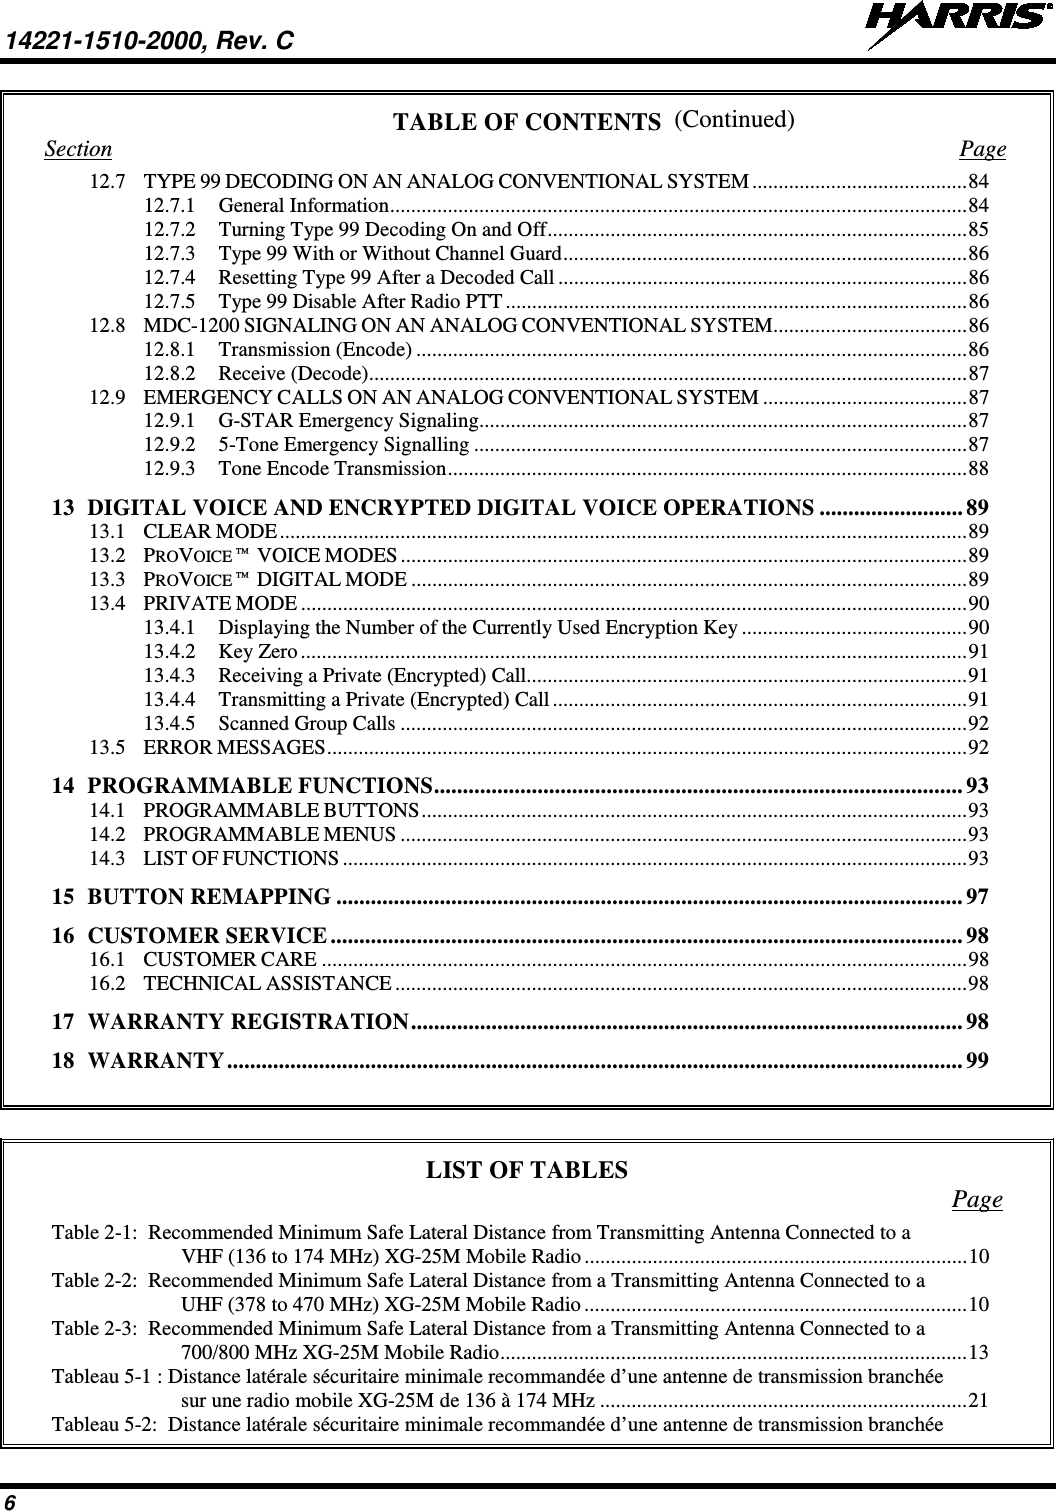 14221-1510-2000, Rev. C   6 (Continued) TABLE OF CONTENTS Section  Page 12.7 TYPE 99 DECODING ON AN ANALOG CONVENTIONAL SYSTEM ......................................... 84 12.7.1 General Information .............................................................................................................. 84 12.7.2 Turning Type 99 Decoding On and Off ................................................................................ 85 12.7.3 Type 99 With or Without Channel Guard ............................................................................. 86 12.7.4 Resetting Type 99 After a Decoded Call .............................................................................. 86 12.7.5 Type 99 Disable After Radio PTT ........................................................................................ 86 12.8 MDC-1200 SIGNALING ON AN ANALOG CONVENTIONAL SYSTEM ..................................... 86 12.8.1 Transmission (Encode) ......................................................................................................... 86 12.8.2 Receive (Decode) .................................................................................................................. 87 12.9 EMERGENCY CALLS ON AN ANALOG CONVENTIONAL SYSTEM ....................................... 87 12.9.1 G-STAR Emergency Signaling............................................................................................. 87 12.9.2 5-Tone Emergency Signalling .............................................................................................. 87 12.9.3 Tone Encode Transmission ................................................................................................... 88 13 DIGITAL VOICE AND ENCRYPTED DIGITAL VOICE OPERATIONS ......................... 89 13.1 CLEAR MODE ................................................................................................................................... 89 13.2 PROVOICE™ VOICE MODES ............................................................................................................ 89 13.3 PROVOICE™ DIGITAL MODE .......................................................................................................... 89 13.4 PRIVATE MODE ............................................................................................................................... 90 13.4.1 Displaying the Number of the Currently Used Encryption Key ........................................... 90 13.4.2 Key Zero ............................................................................................................................... 91 13.4.3 Receiving a Private (Encrypted) Call.................................................................................... 91 13.4.4 Transmitting a Private (Encrypted) Call ............................................................................... 91 13.4.5 Scanned Group Calls ............................................................................................................ 92 13.5 ERROR MESSAGES .......................................................................................................................... 92 14 PROGRAMMABLE FUNCTIONS ............................................................................................ 93 14.1 PROGRAMMABLE BUTTONS ........................................................................................................ 93 14.2 PROGRAMMABLE MENUS ............................................................................................................ 93 14.3 LIST OF FUNCTIONS ....................................................................................................................... 93 15 BUTTON REMAPPING ............................................................................................................. 97 16 CUSTOMER SERVICE .............................................................................................................. 98 16.1 CUSTOMER CARE ........................................................................................................................... 98 16.2 TECHNICAL ASSISTANCE ............................................................................................................. 98 17 WARRANTY REGISTRATION ................................................................................................ 98 18 WARRANTY ................................................................................................................................ 99    LIST OF TABLES Page Table 2-1:  Recommended Minimum Safe Lateral Distance from Transmitting Antenna Connected to a VHF (136 to 174 MHz) XG-25M Mobile Radio ......................................................................... 10 Table 2-2:  Recommended Minimum Safe Lateral Distance from a Transmitting Antenna Connected to a UHF (378 to 470 MHz) XG-25M Mobile Radio ......................................................................... 10 Table 2-3:  Recommended Minimum Safe Lateral Distance from a Transmitting Antenna Connected to a 700/800 MHz XG-25M Mobile Radio ......................................................................................... 13 Tableau 5-1 : Distance latérale sécuritaire minimale recommandée d’une antenne de transmission branchée sur une radio mobile XG-25M de 136 à 174 MHz ...................................................................... 21 Tableau 5-2:  Distance latérale sécuritaire minimale recommandée d’une antenne de transmission branchée 